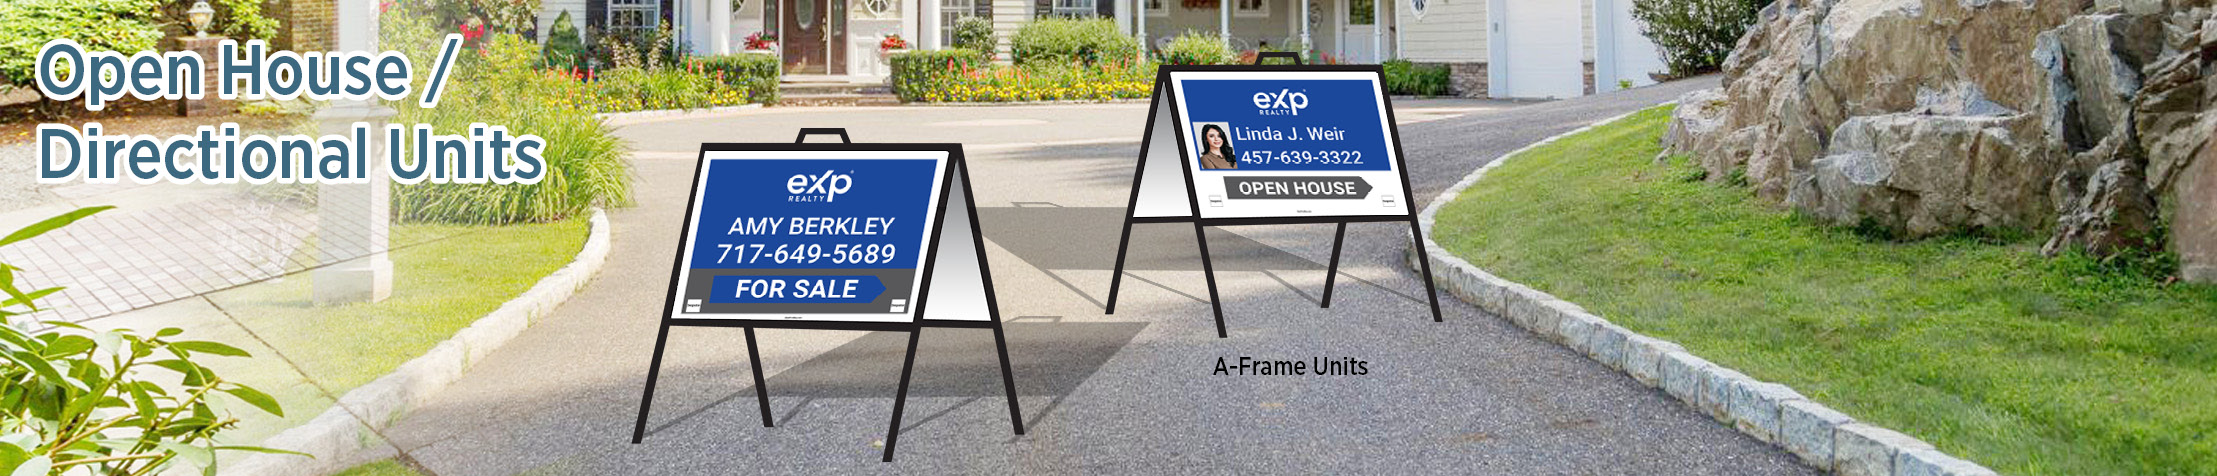 eXp Realty Real Estate Open House/Directional Units - directional real estate signs | BestPrintBuy.com